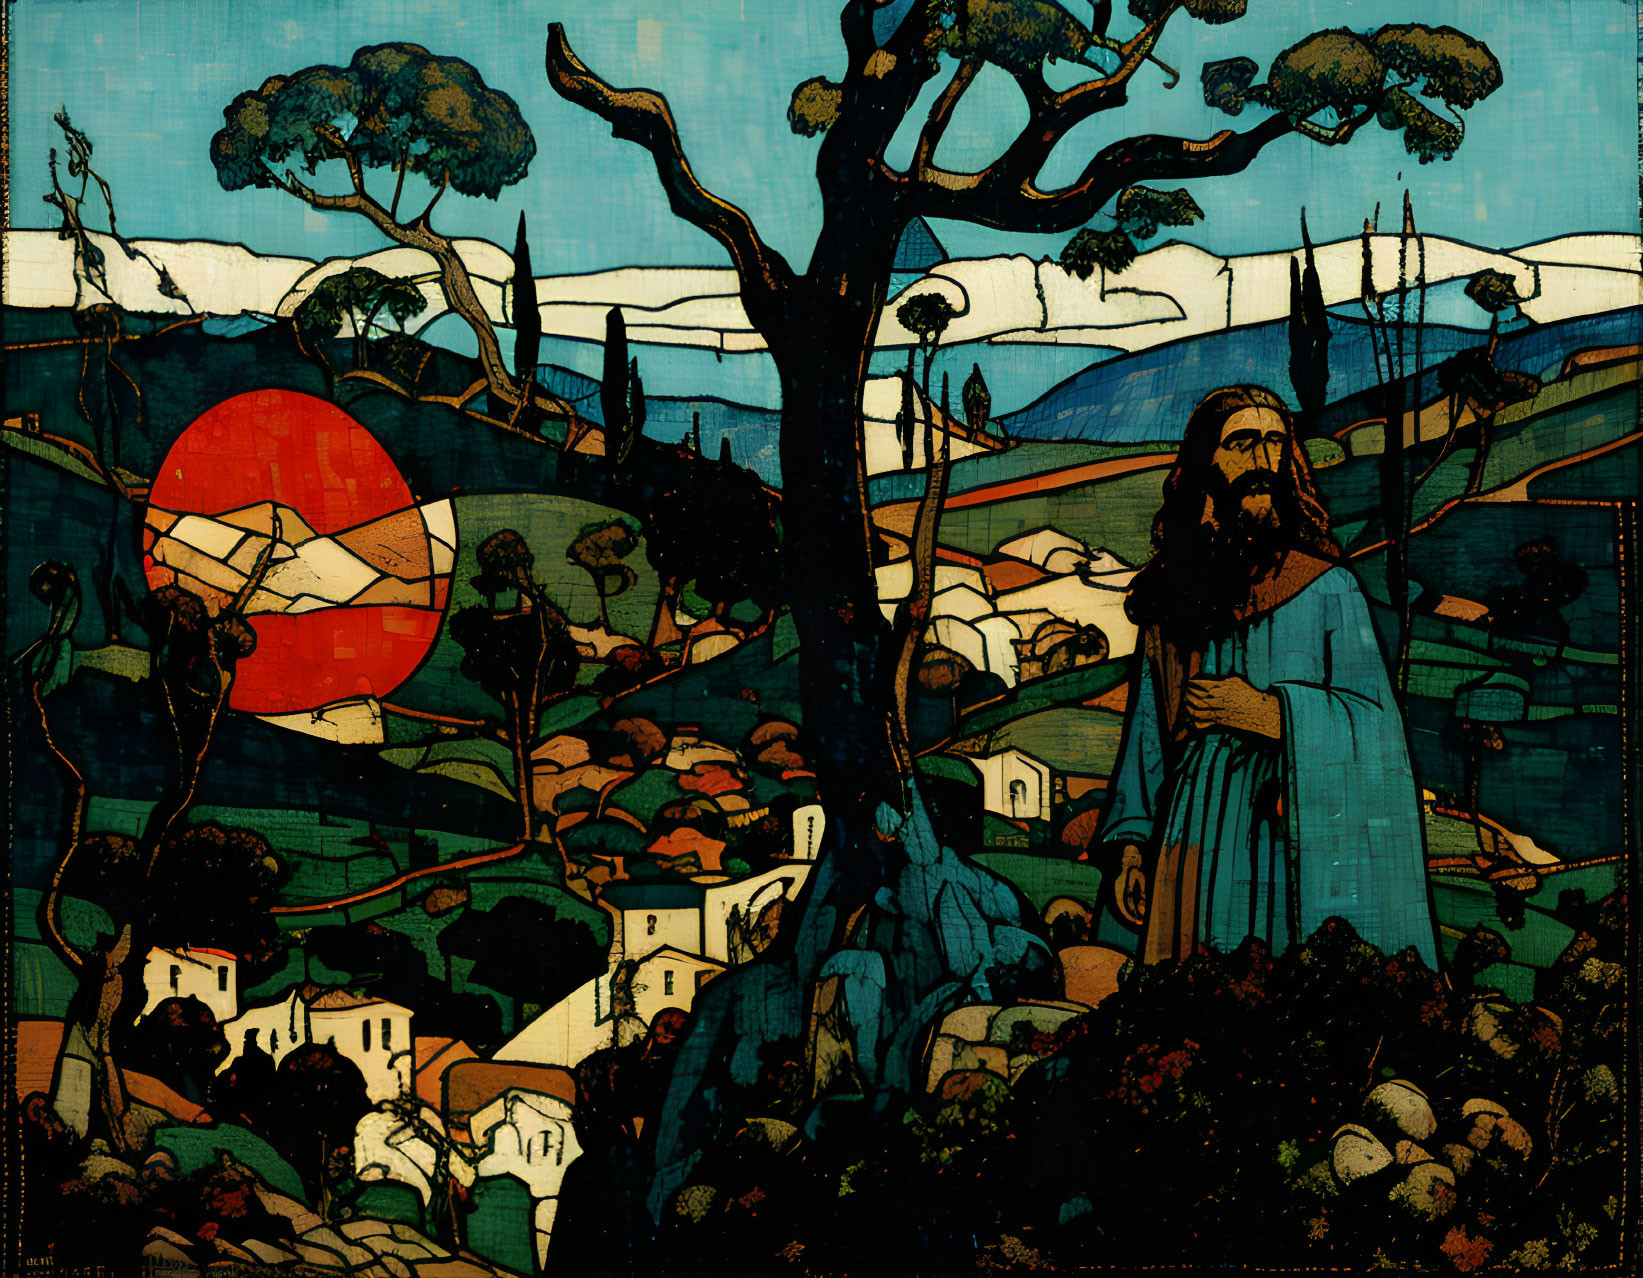 Bearded figure in robe among rolling hills with red sun